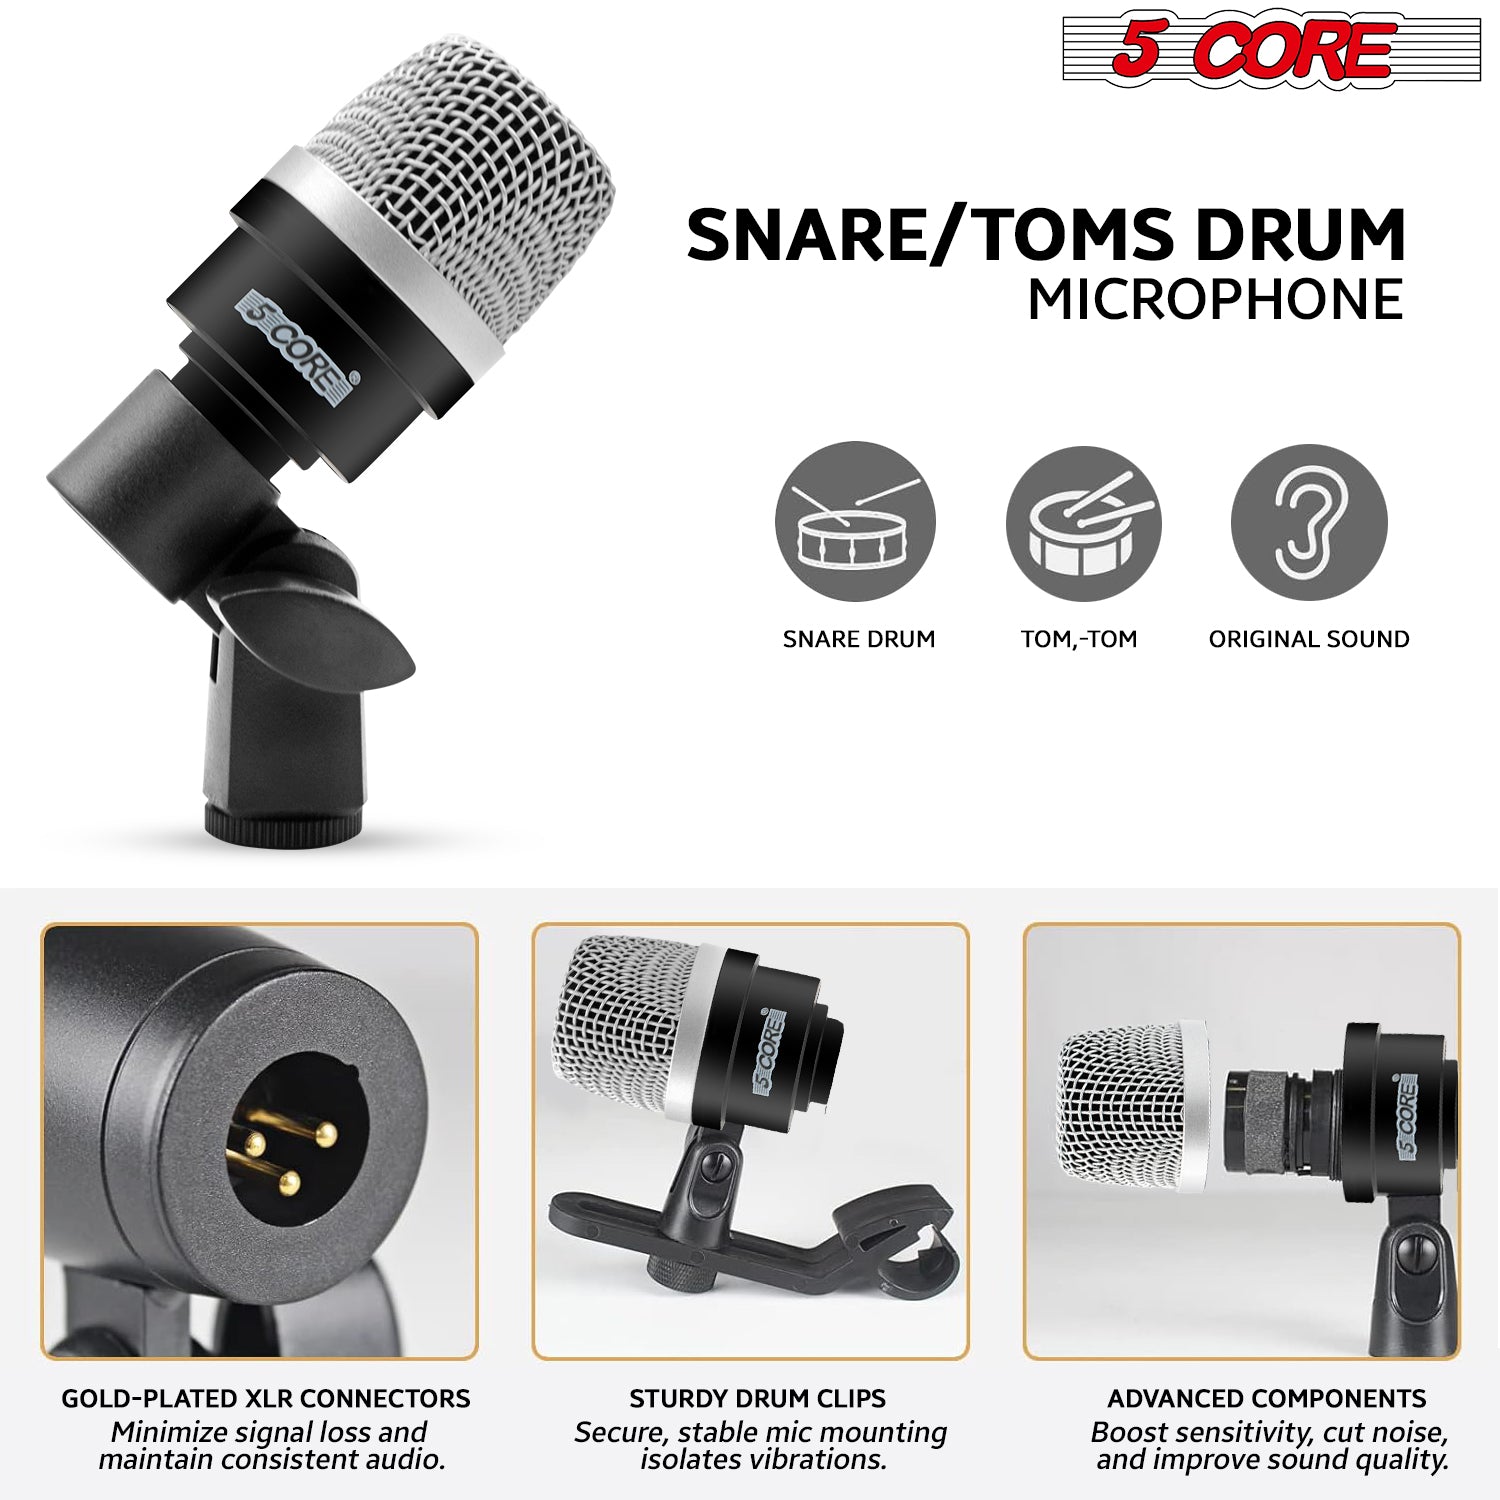 Seven-piece dynamic XLR microphone kit designed specifically for drummers